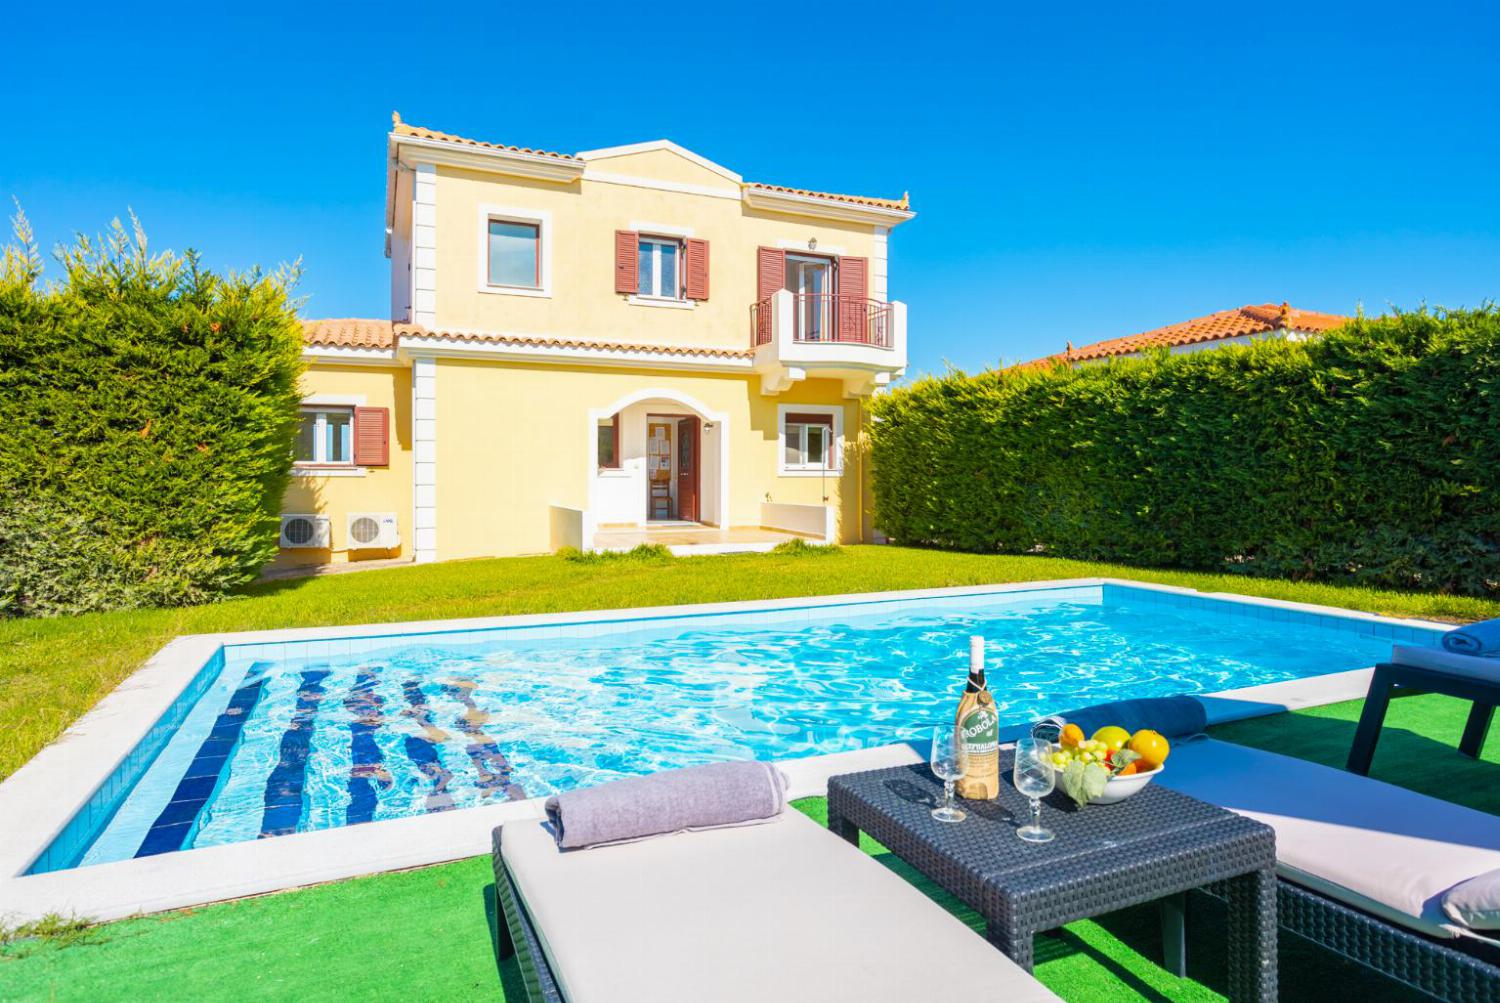 Beautiful villa with private pool, terrace, and garden with panoramic countryside views